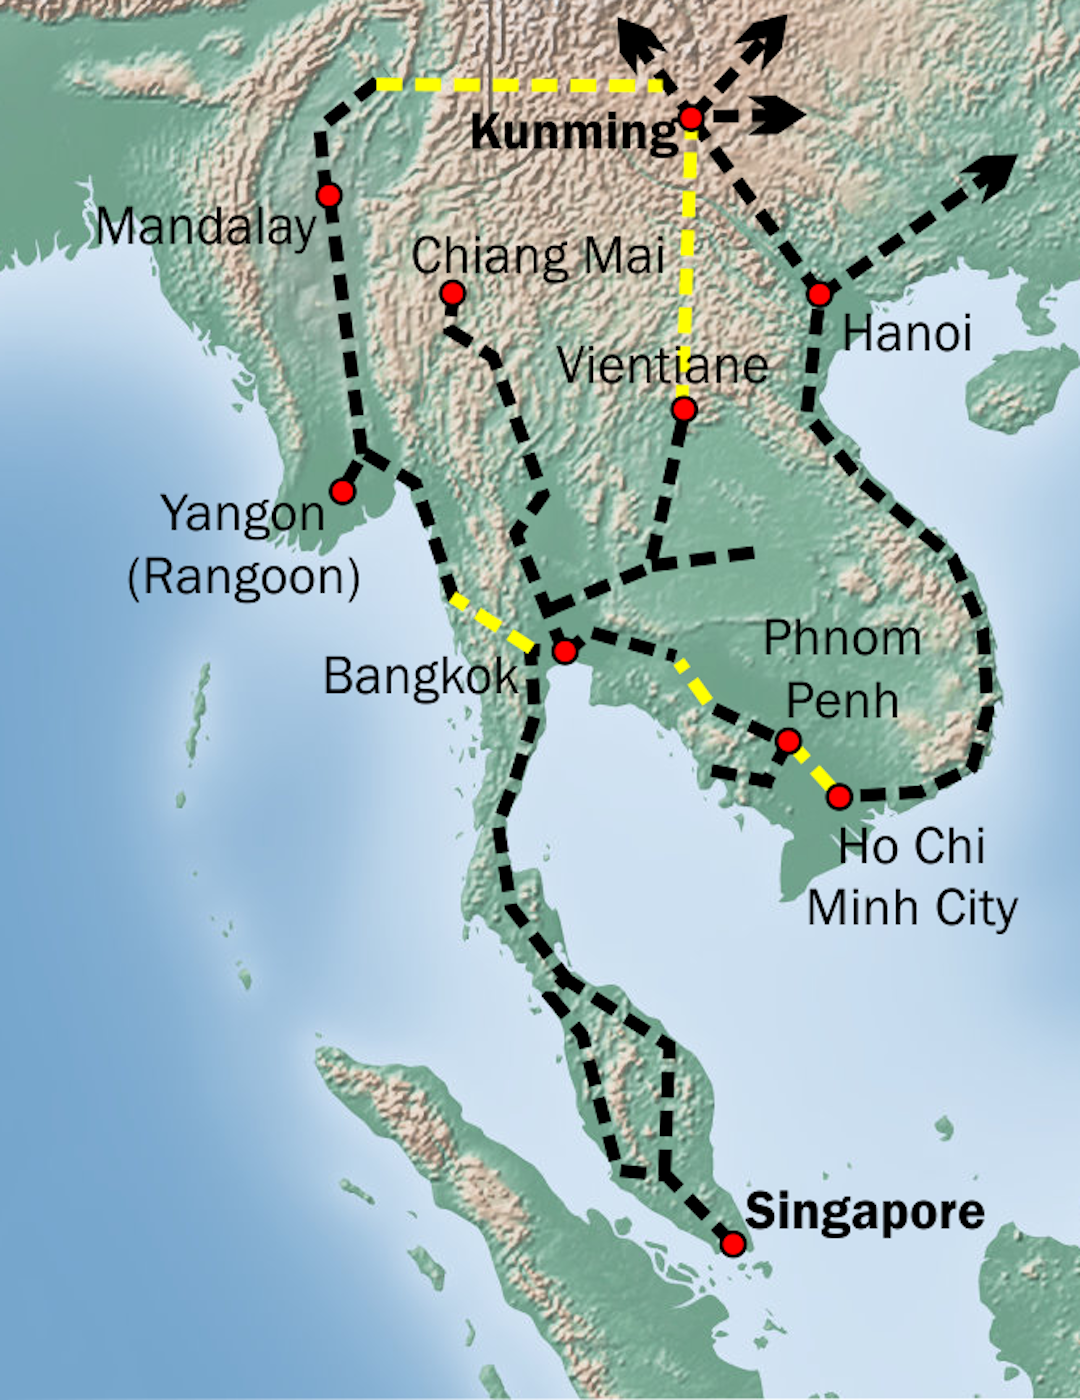 Overview of the missing links (in yellow) the Kunming-Singapore Railway